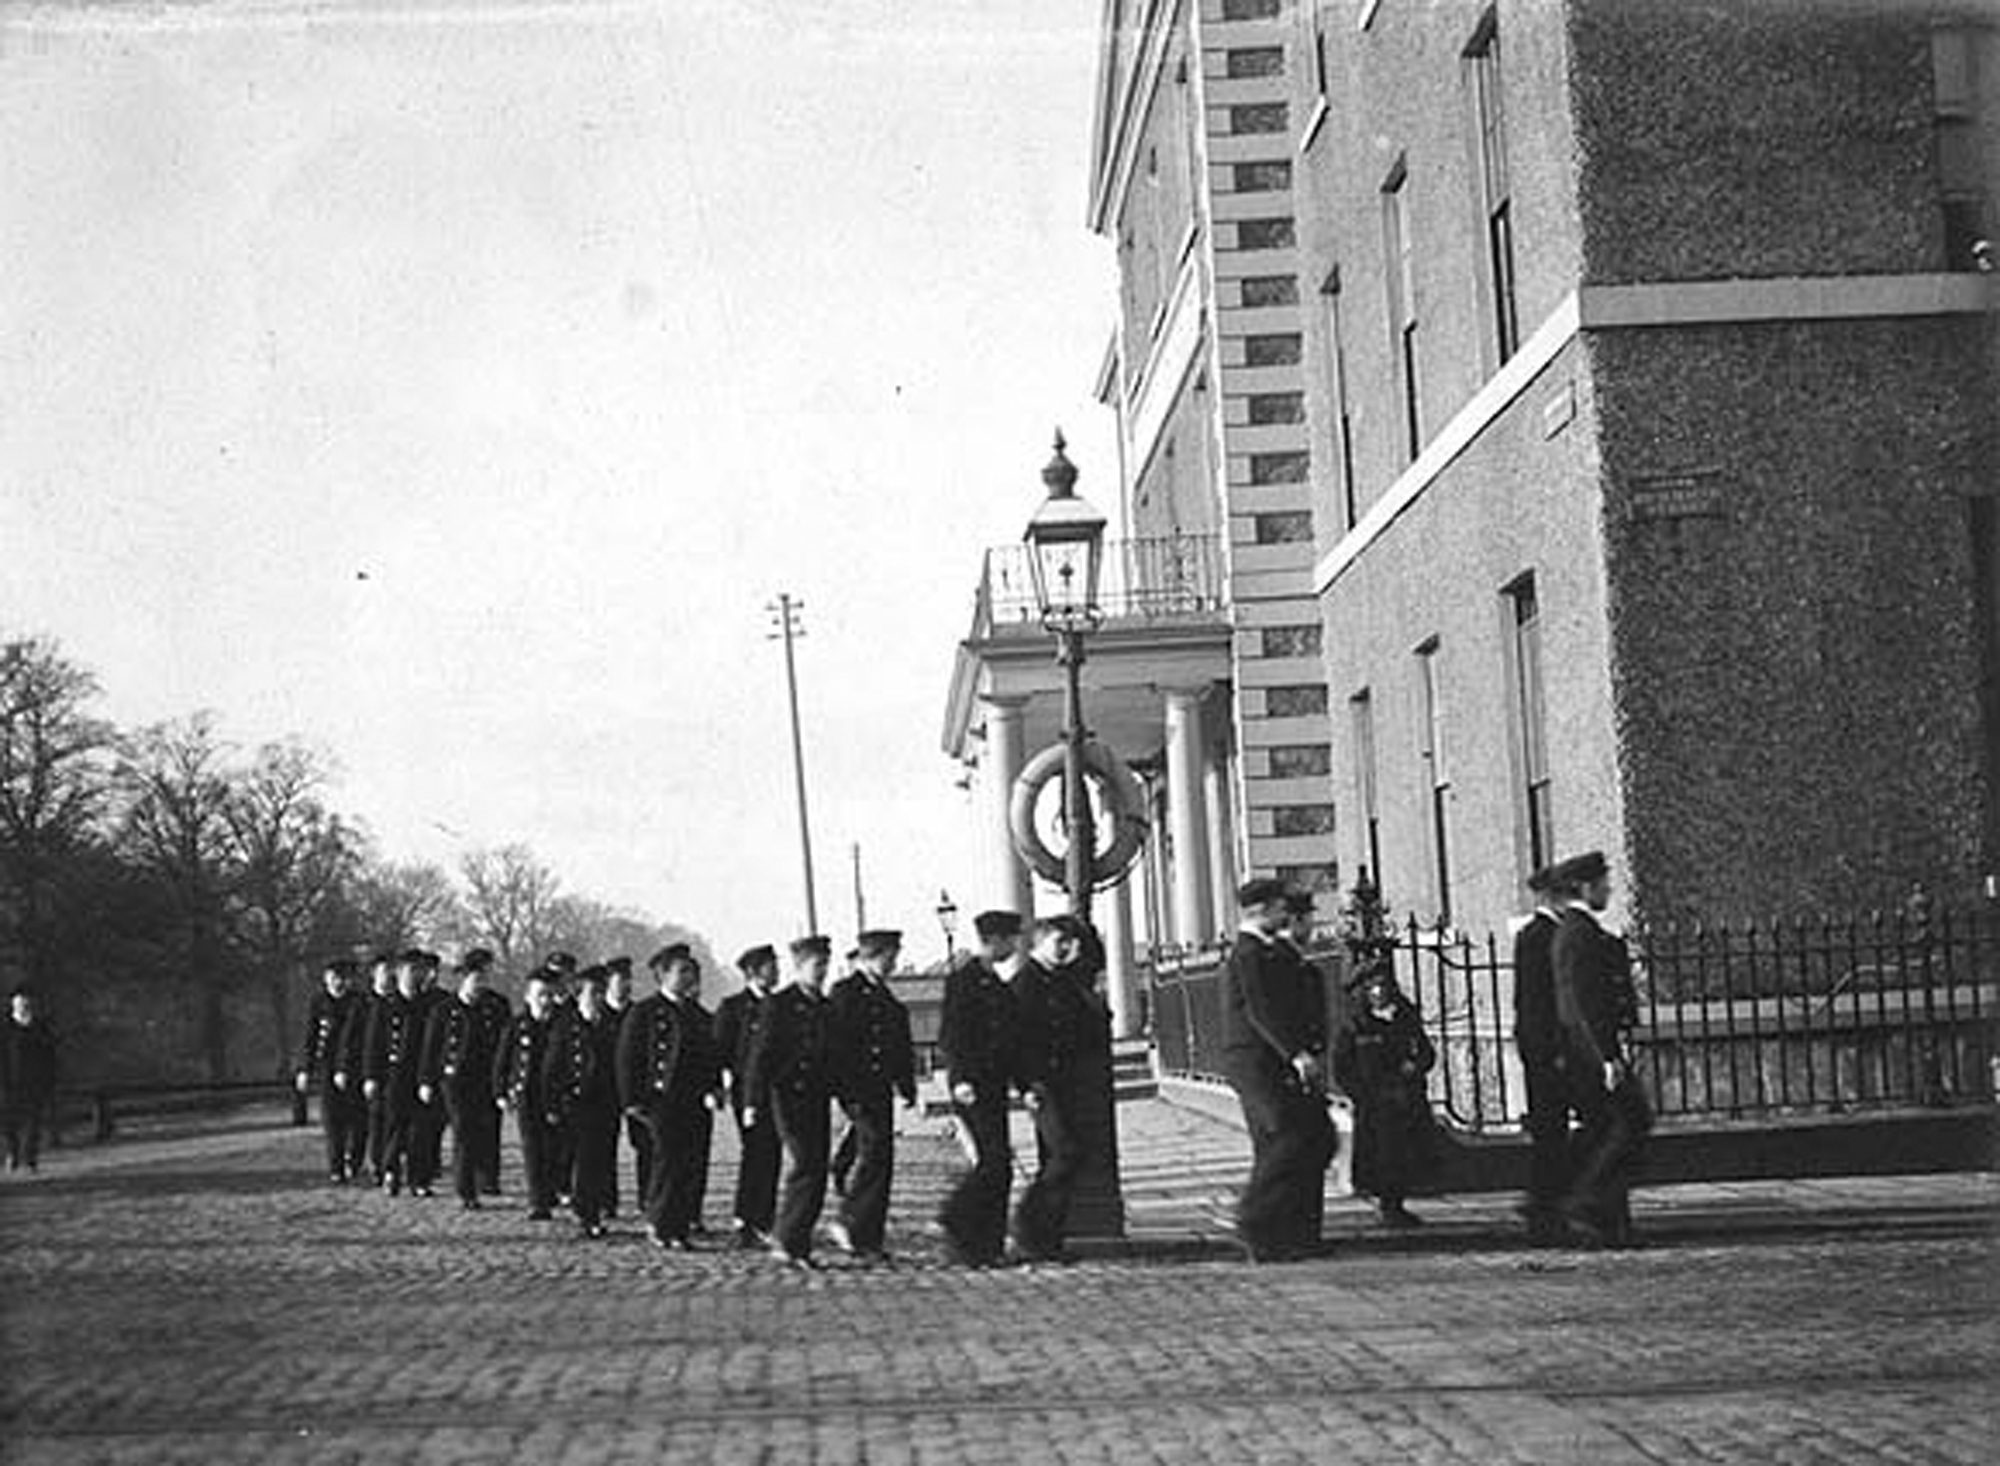 Group of boys in uniform marching at the corner of Portobello and Richmond Street South